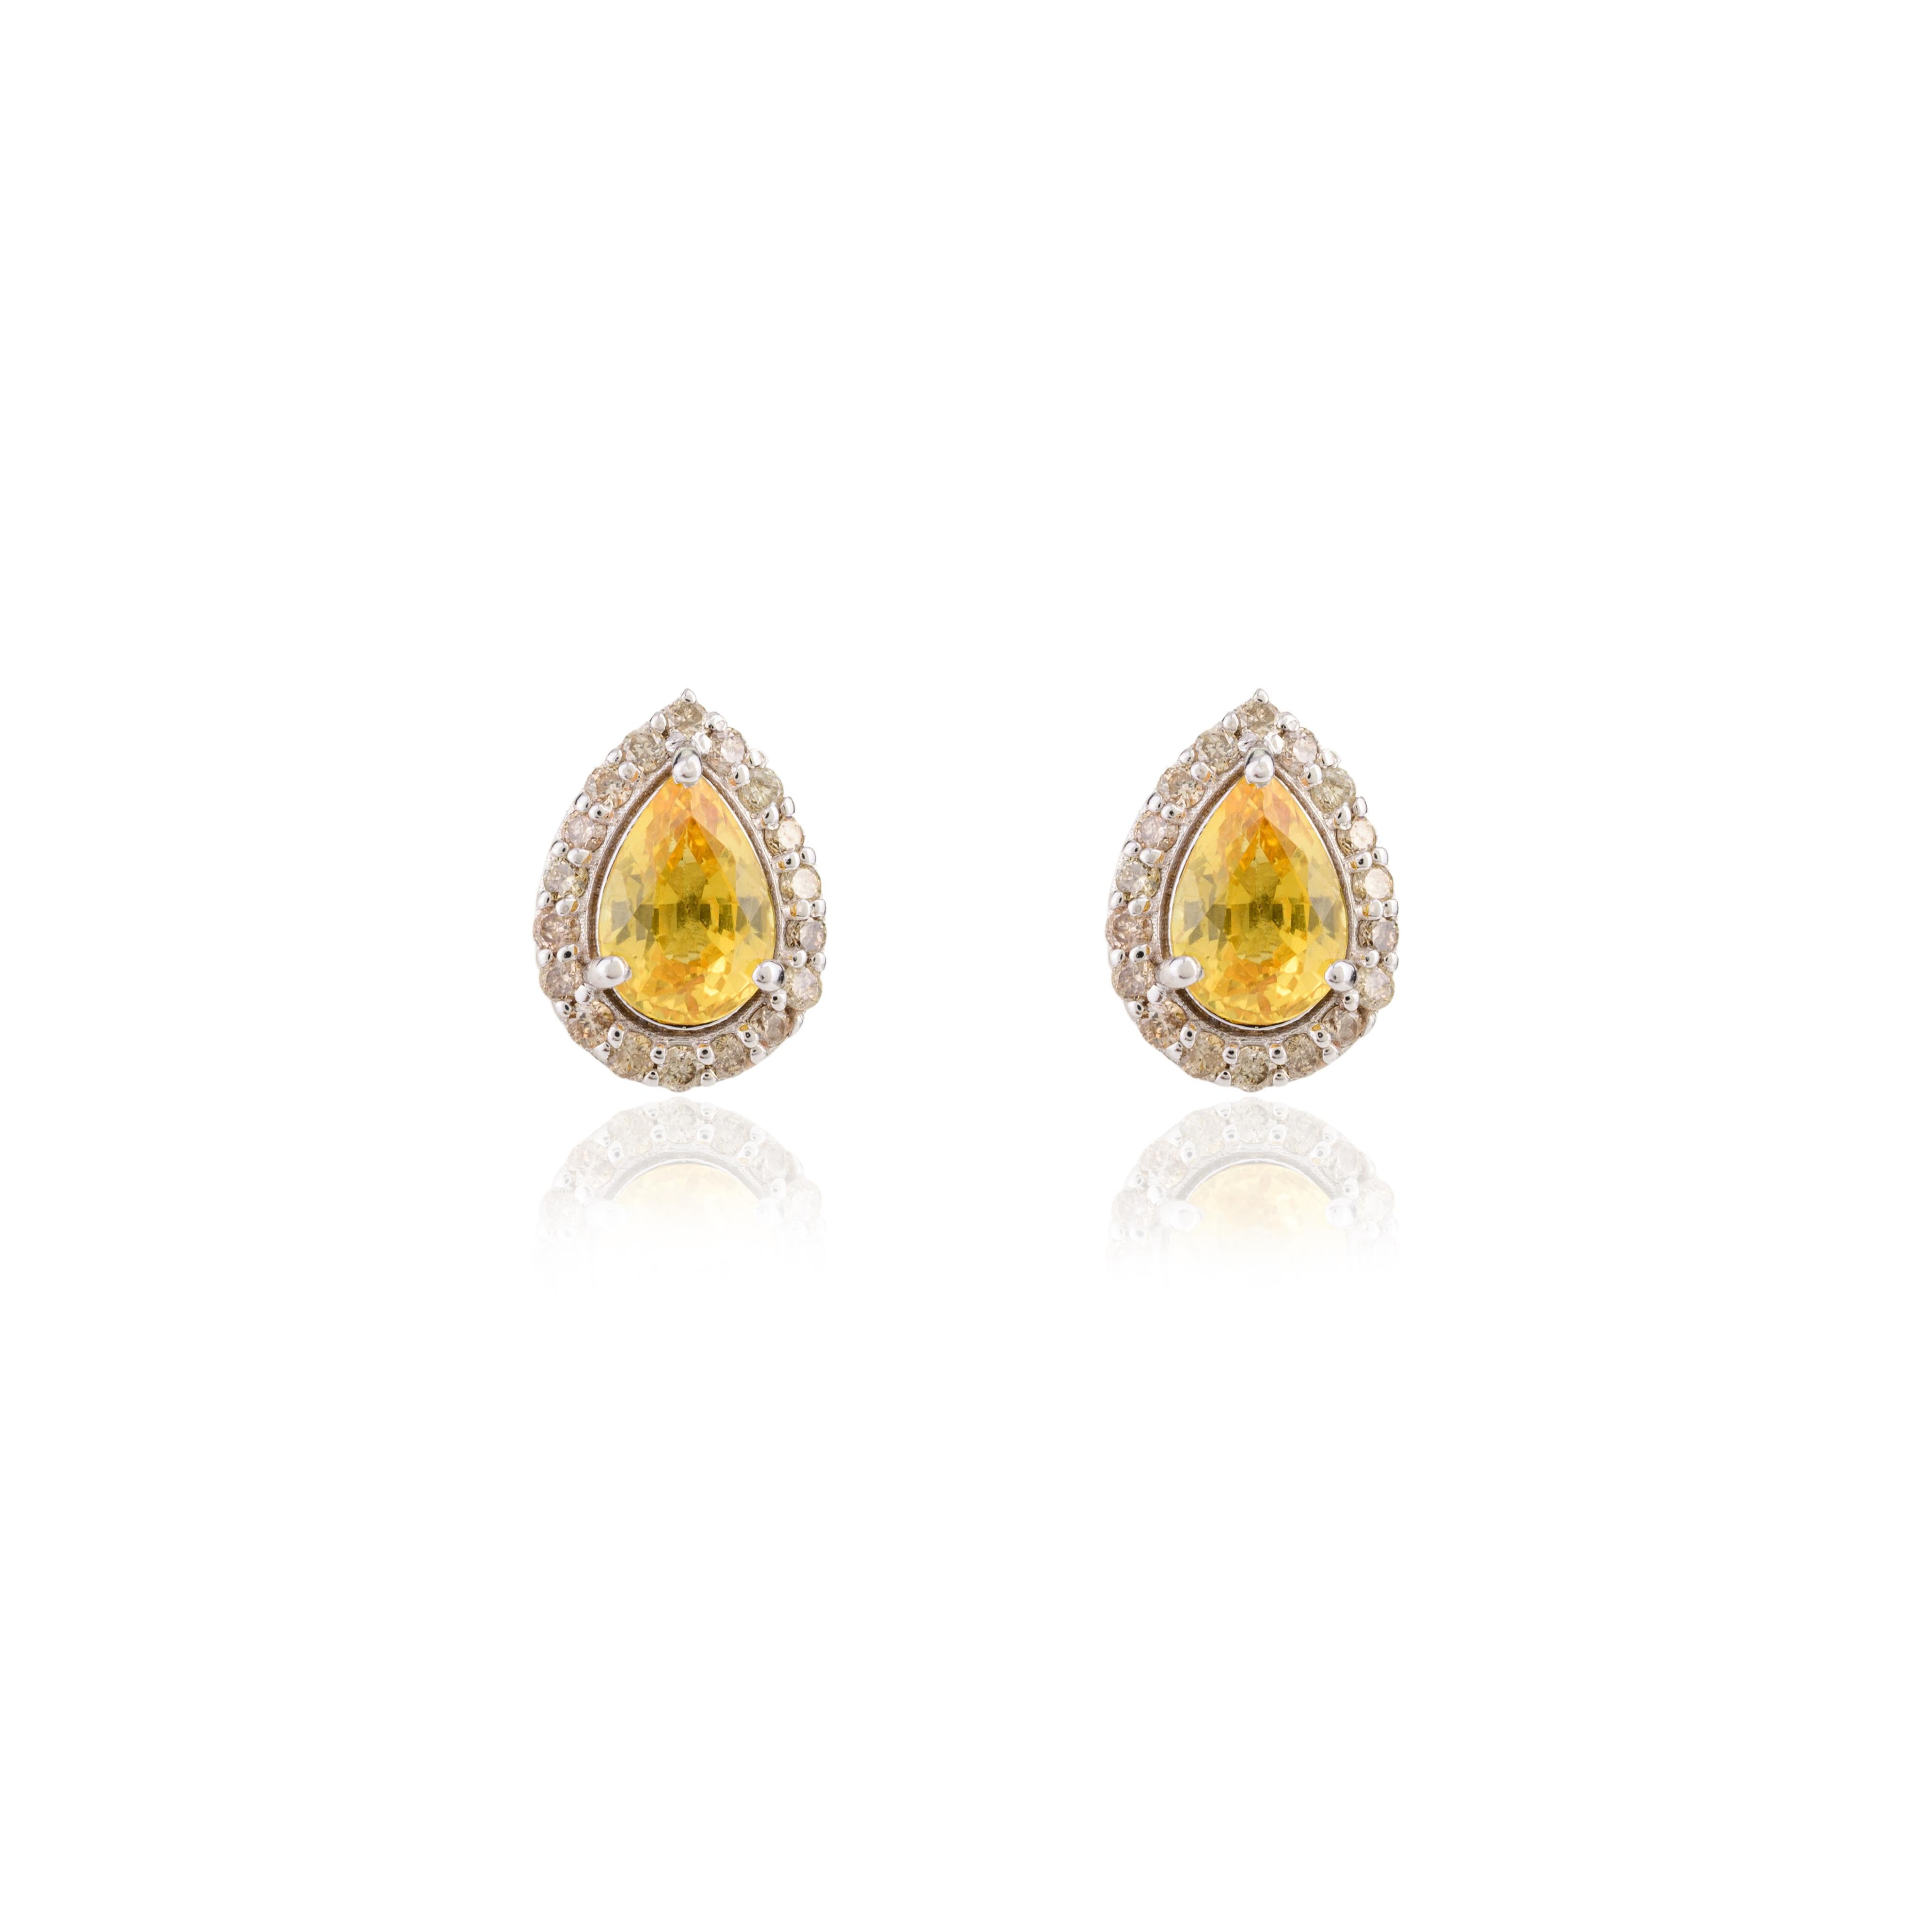 Everyday Yellow Sapphire and Diamond Stud Earrings in 18K Gold to make a statement with your look. You shall need stud earrings to make a statement with your look. These earrings create a sparkling, luxurious look featuring pear cut yellow sapphire